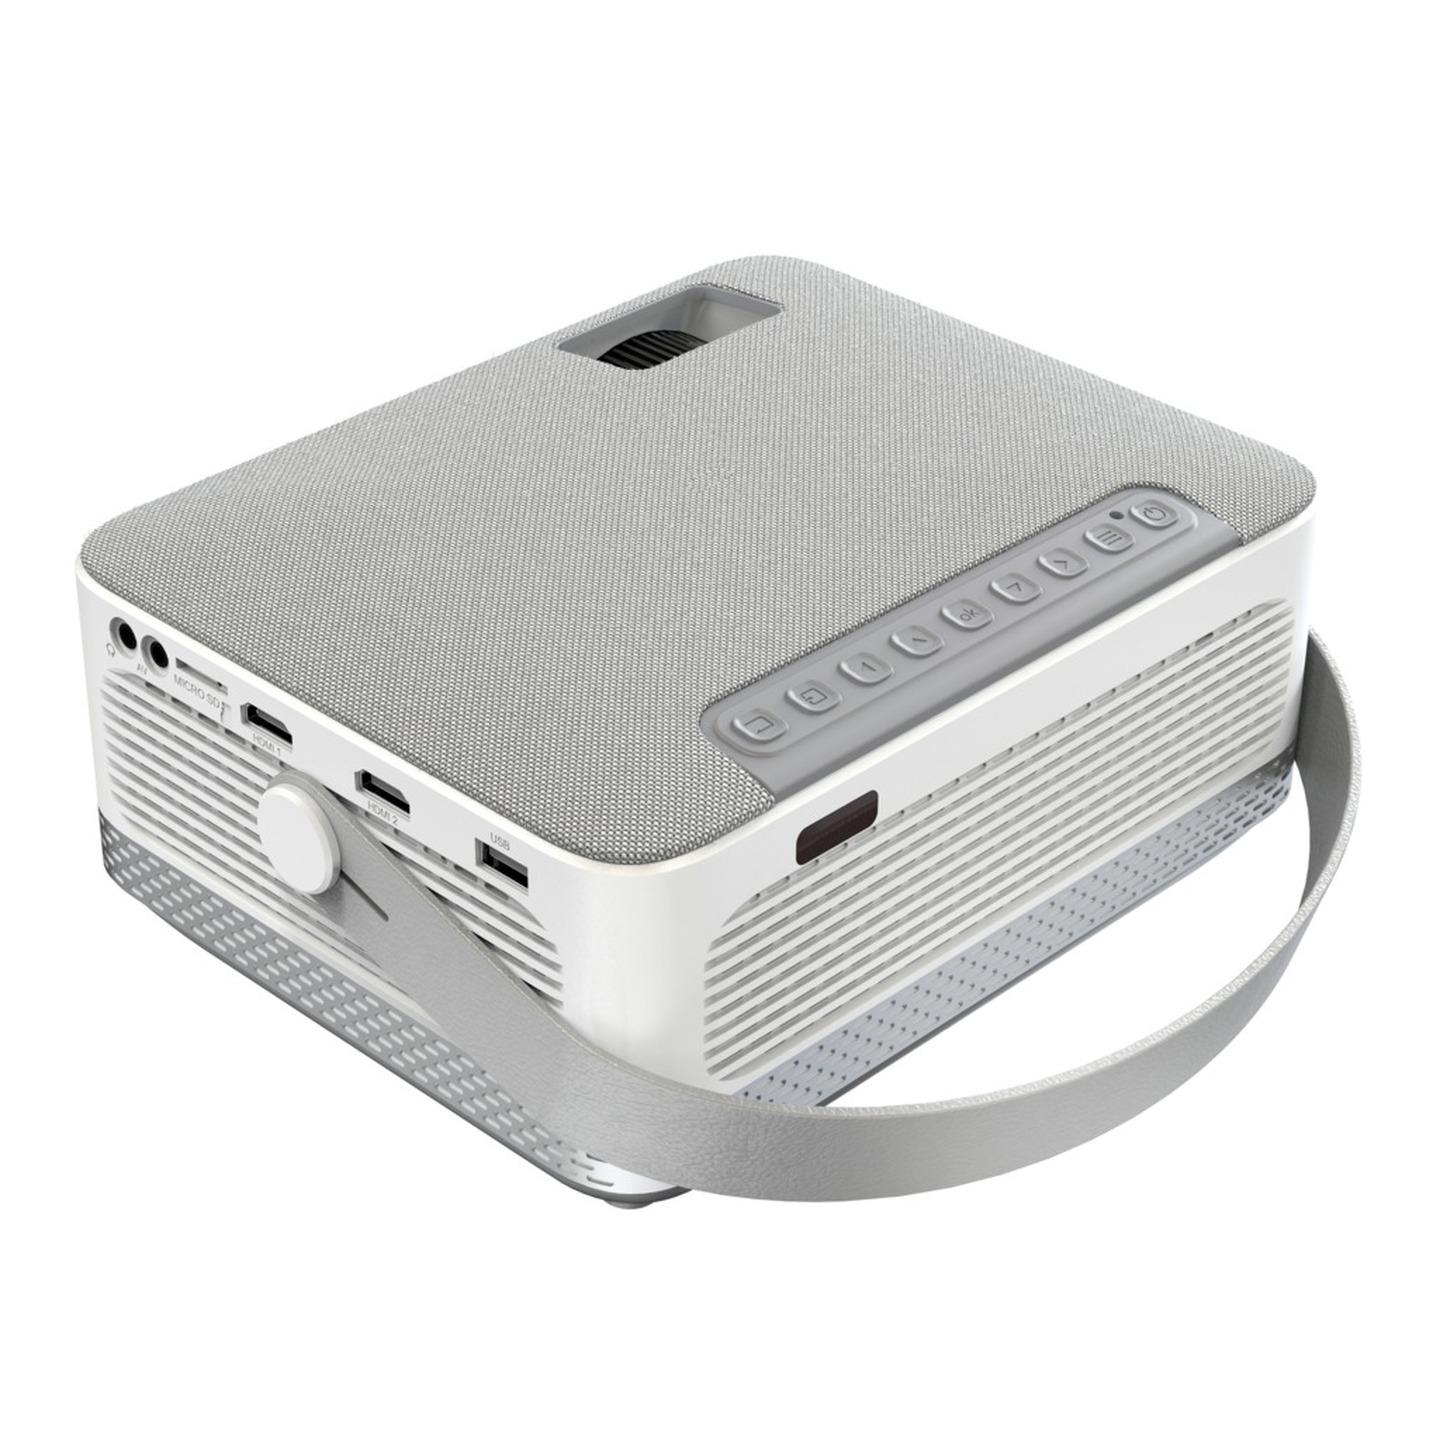 Digitech Portable HD LED Rechargeable Projector with HDMI/USB